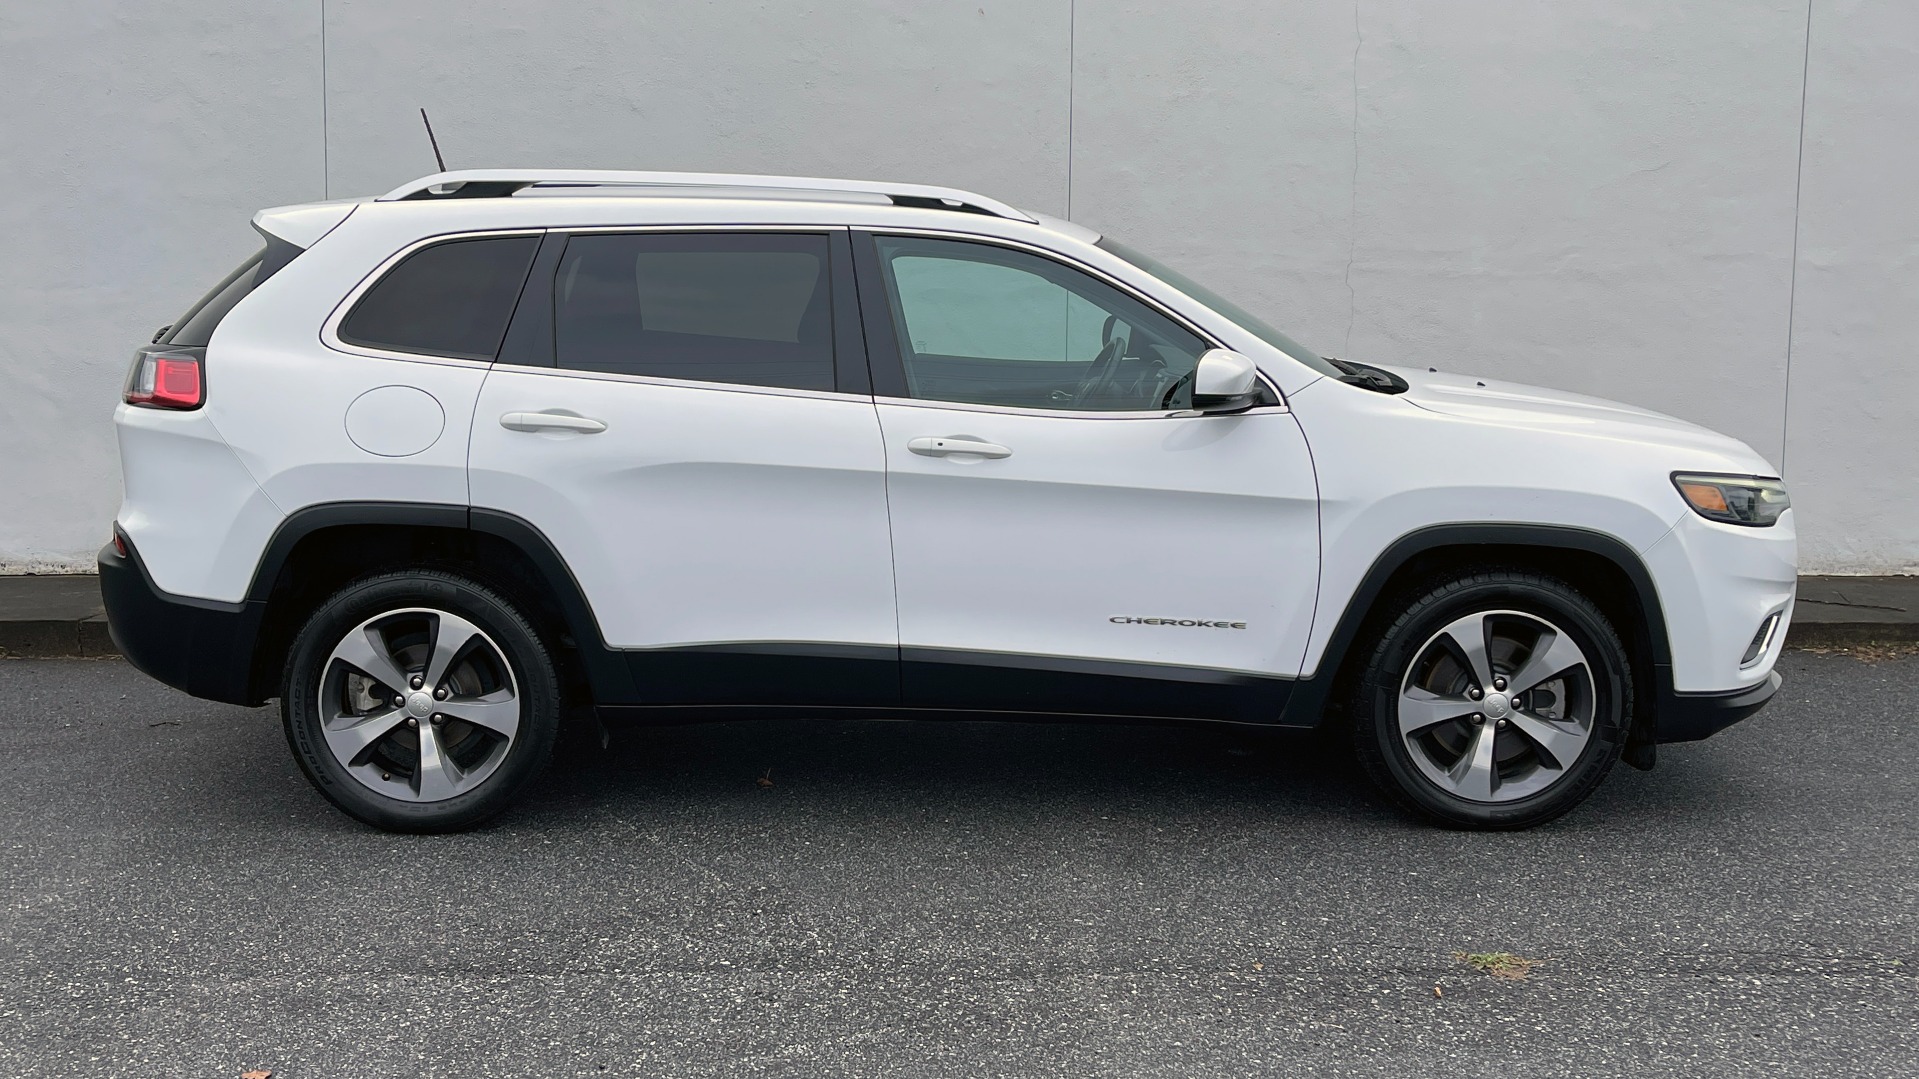 Used 2019 Jeep CHEROKEE LIMITED 2.4L / FWD / APPLE CARPLAY / KEYLESS-GO / REARVIEW for sale Sold at Formula Imports in Charlotte NC 28227 5